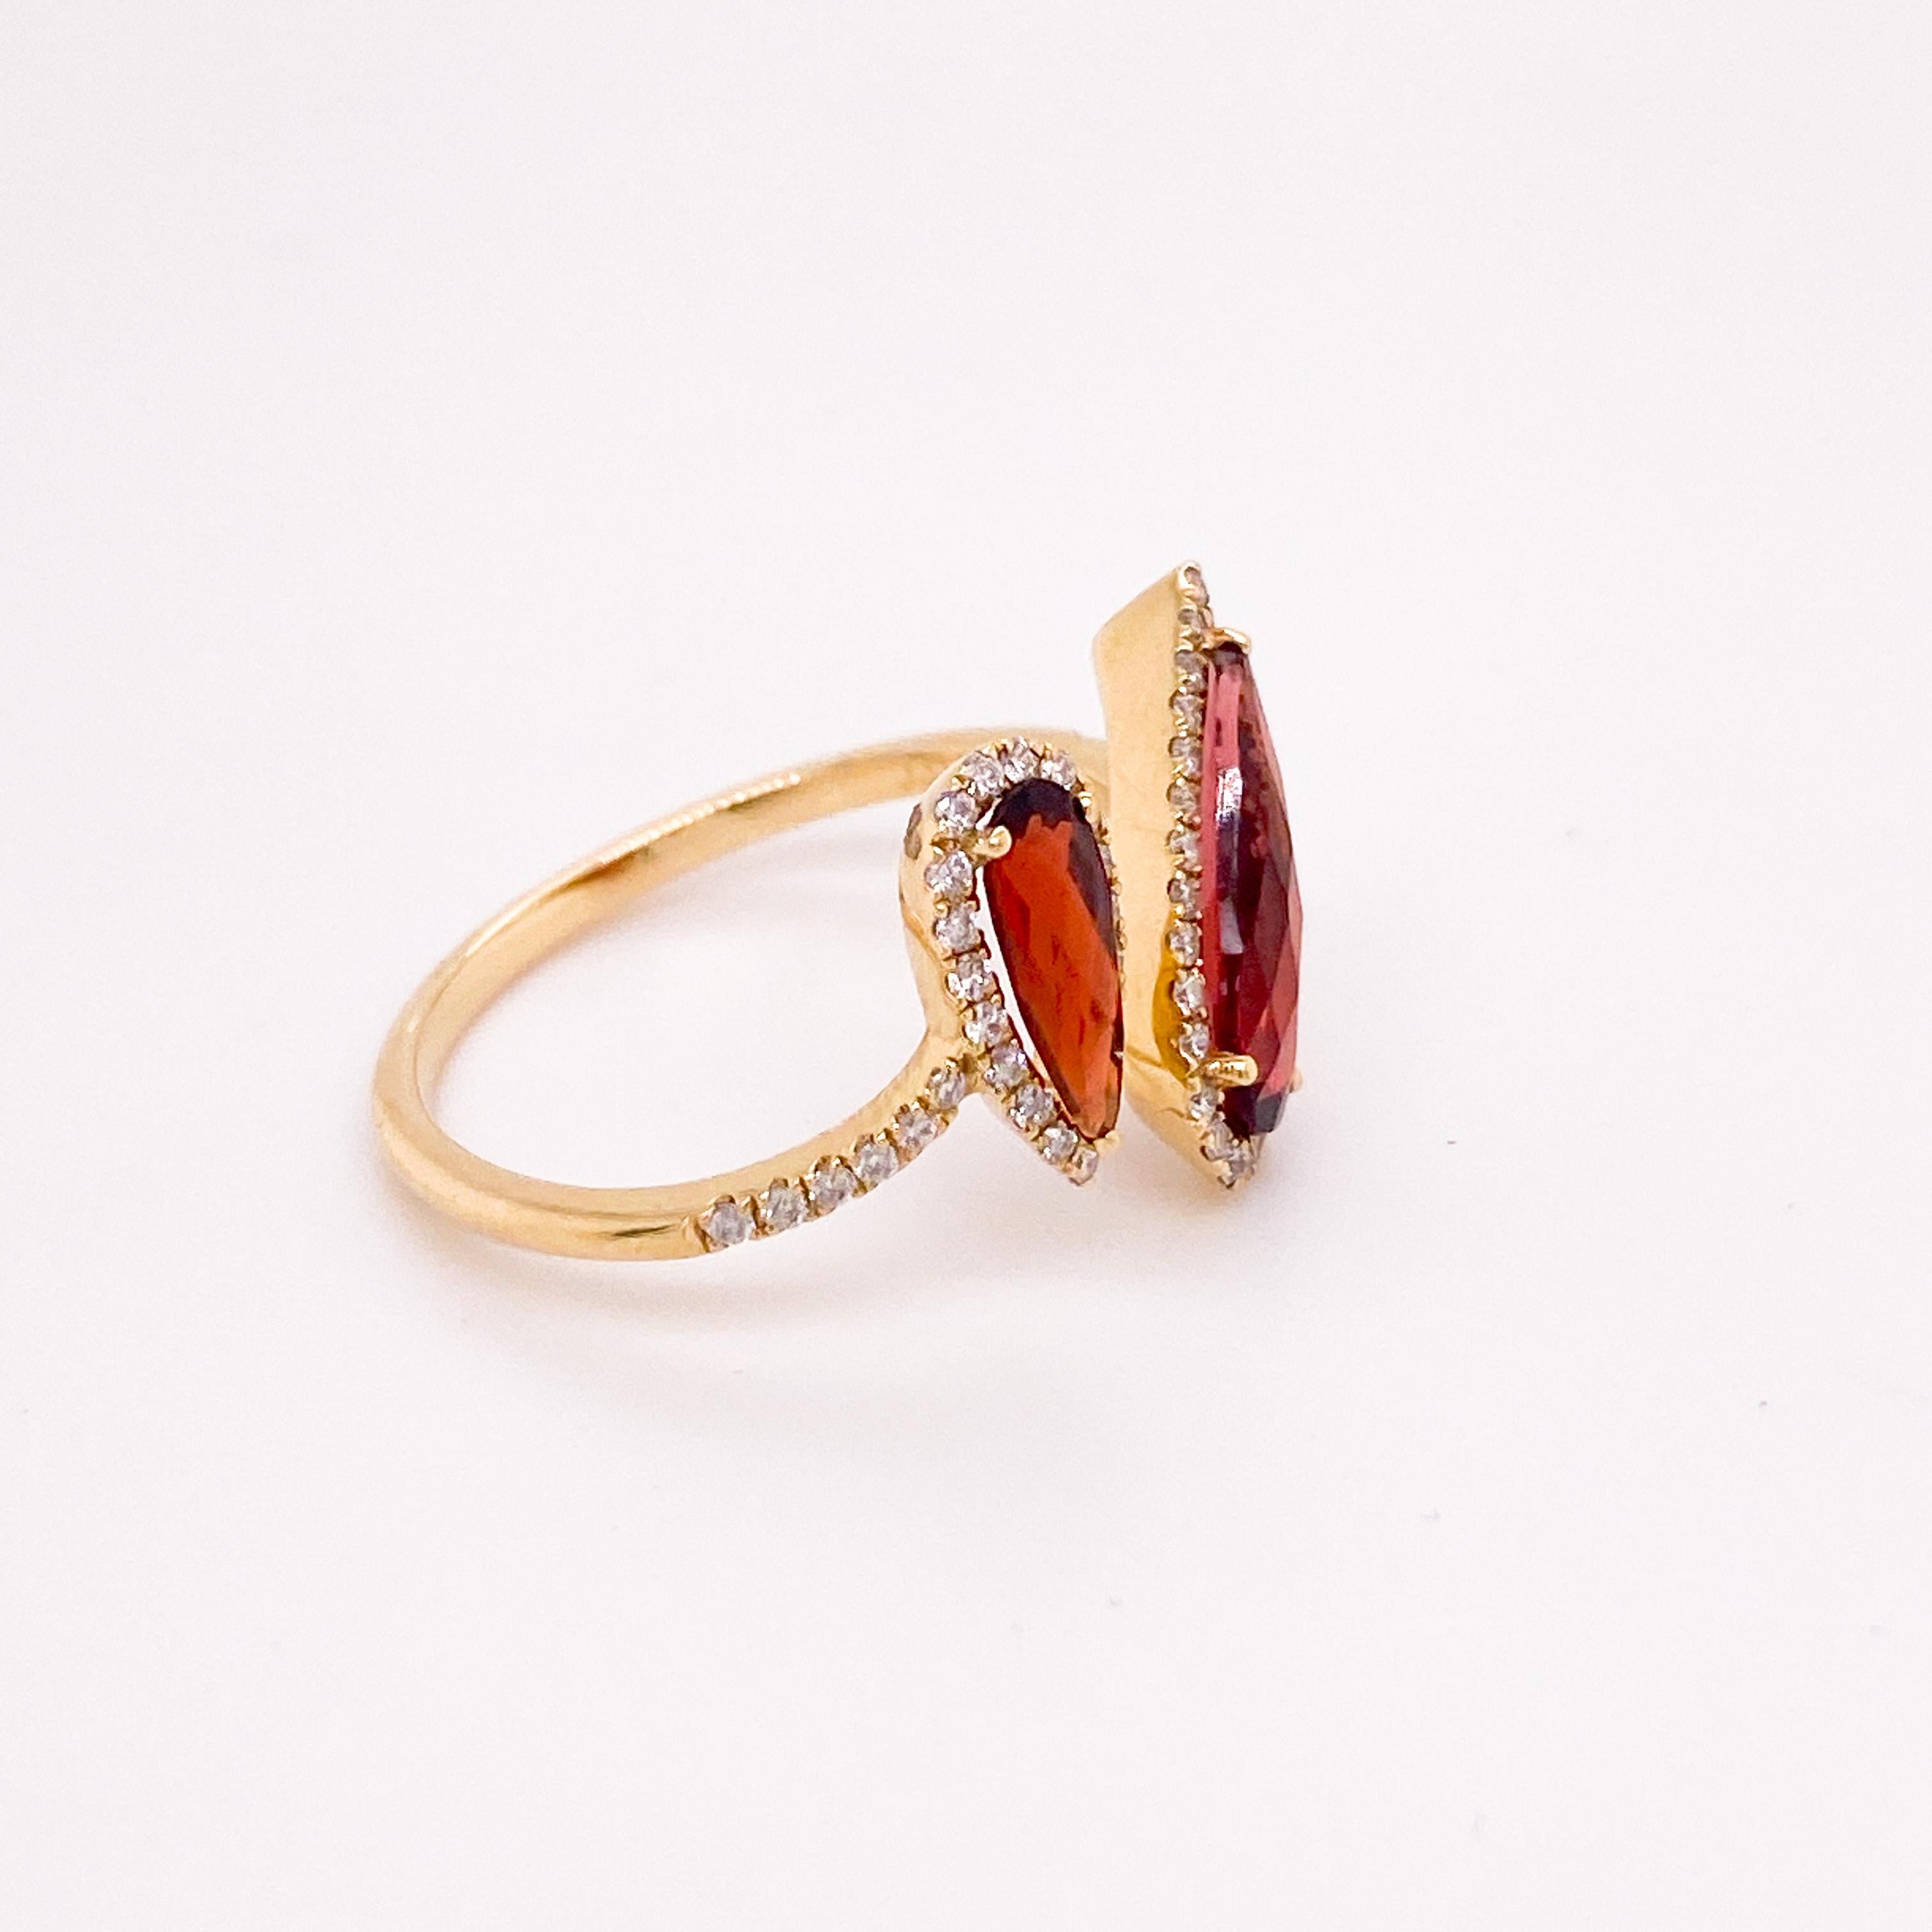 For Sale:  Toi et Moi Garnet Bypass Ring w Diamond Halos You and Me Ring in 14k Gold 2